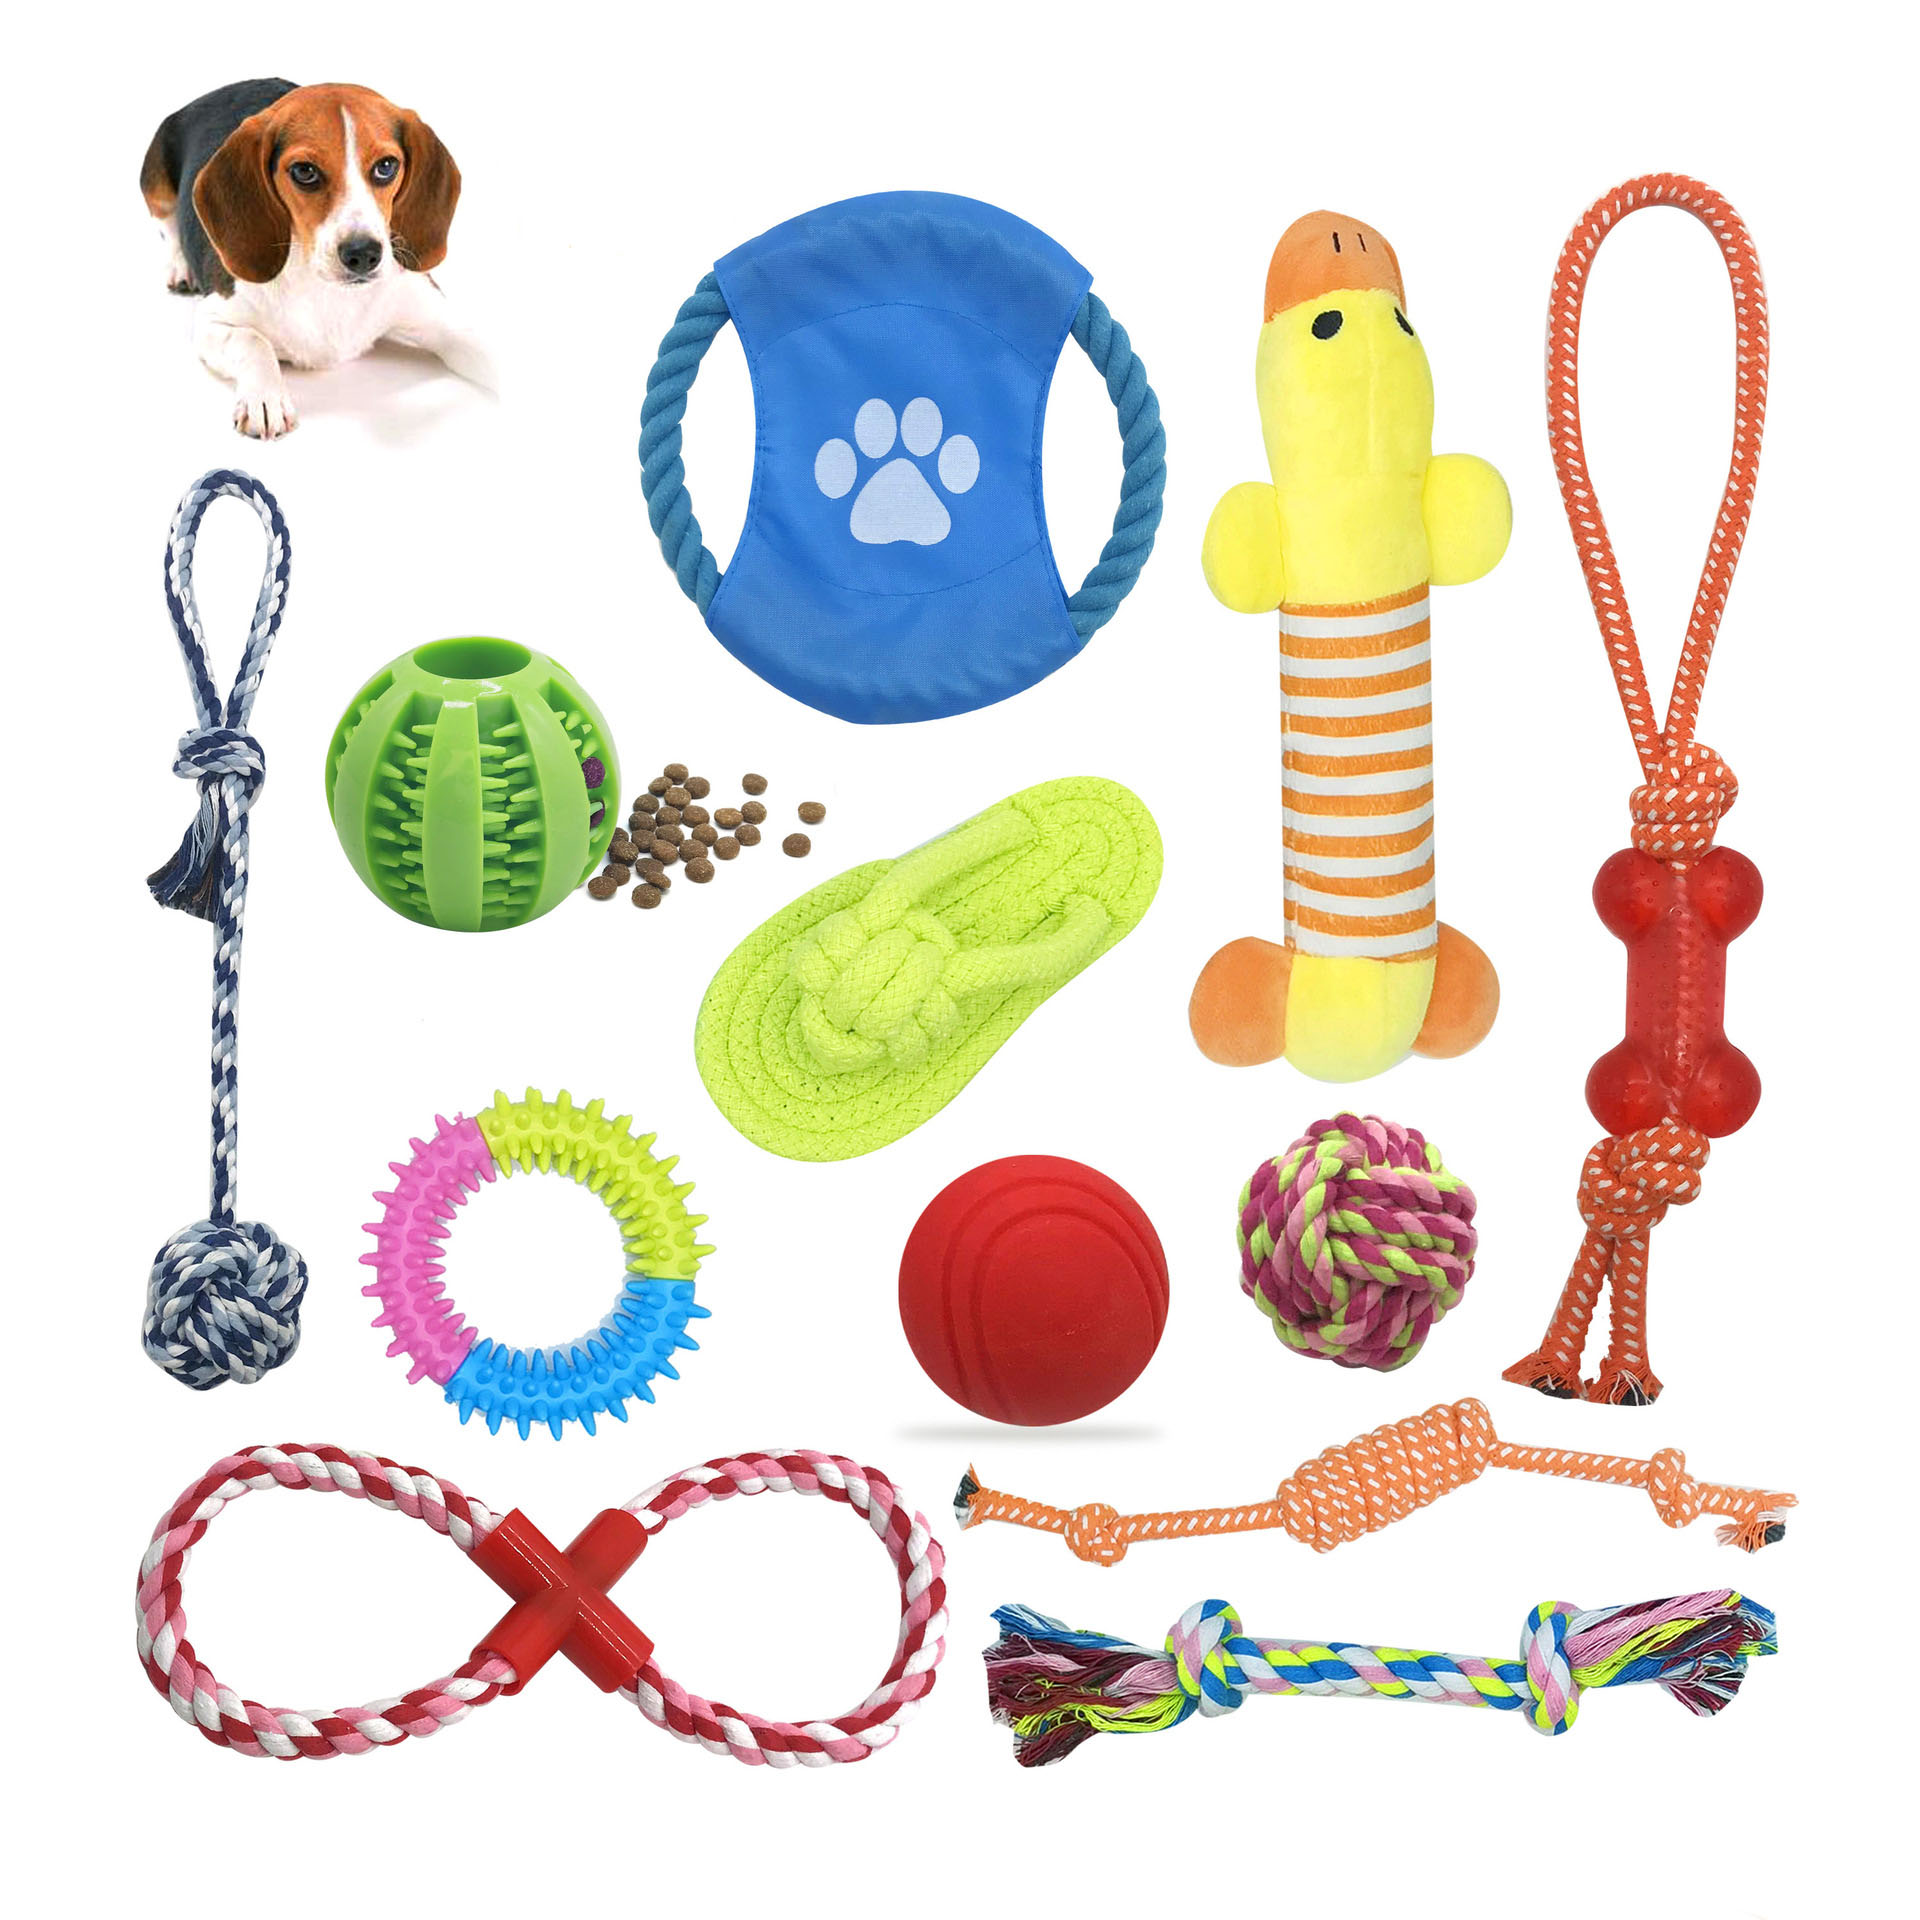 Oanpaste 12 Pack Set Dog Toys Interactive Squeaky Dog Toy Pet Plush Toy